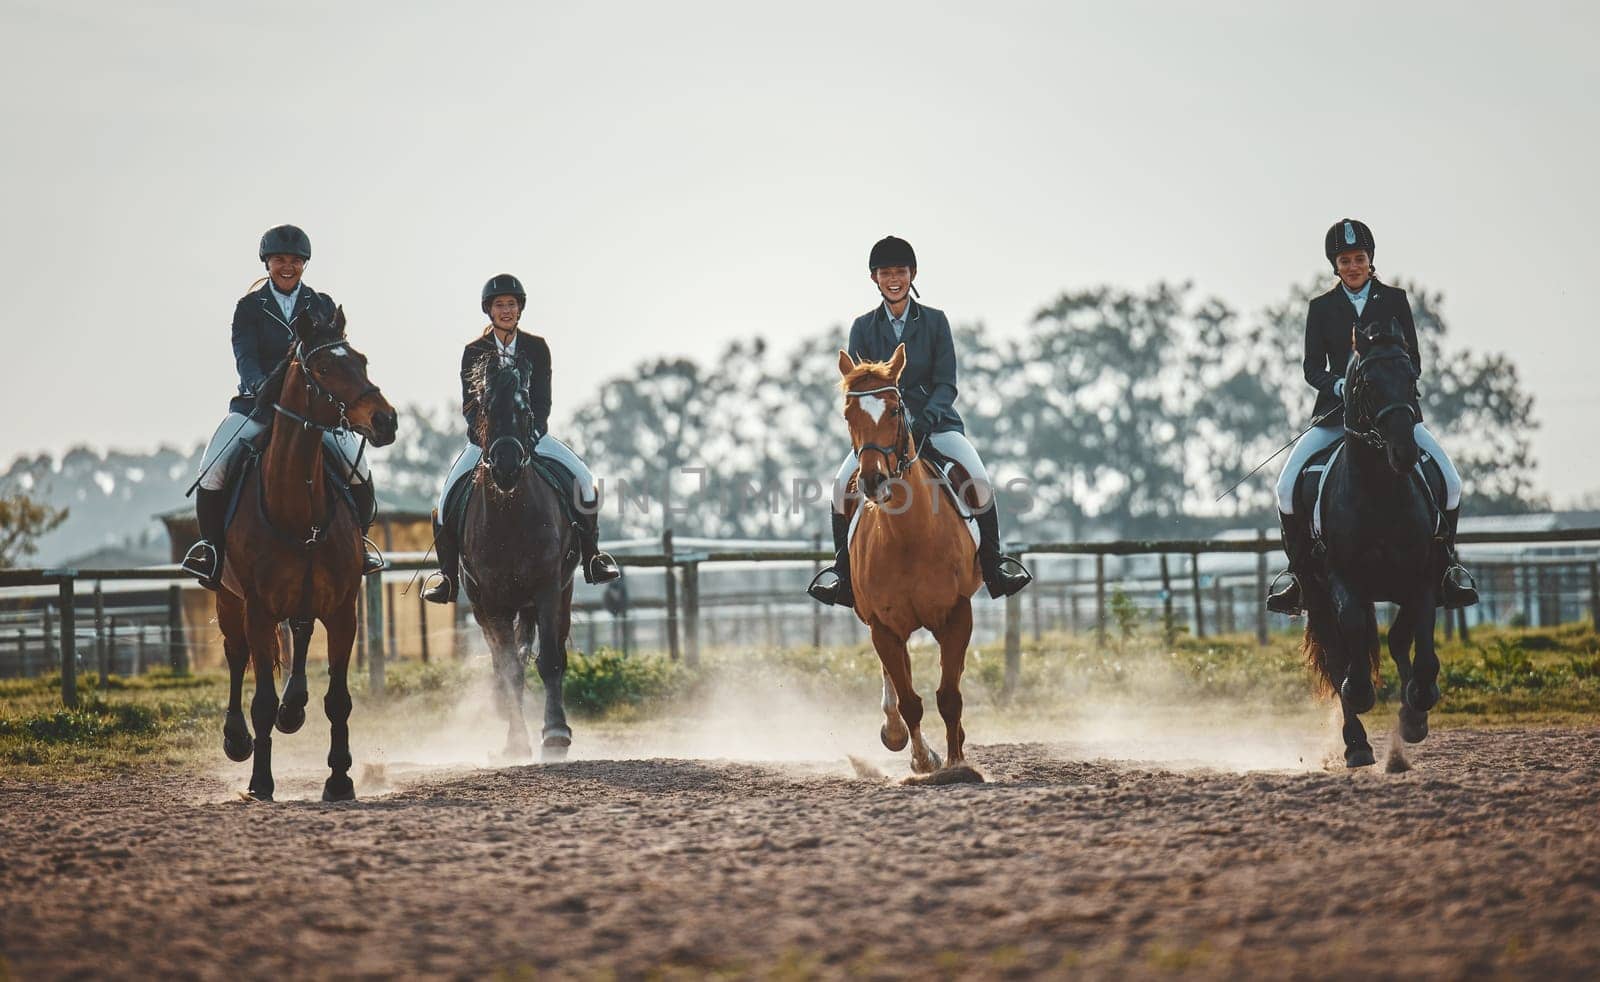 Equestrian, horse riding group and sports, women outdoor in countryside with rider or jockey, recreation and action. Animal, sport and fitness with athlete, competition with healthy lifestyle.